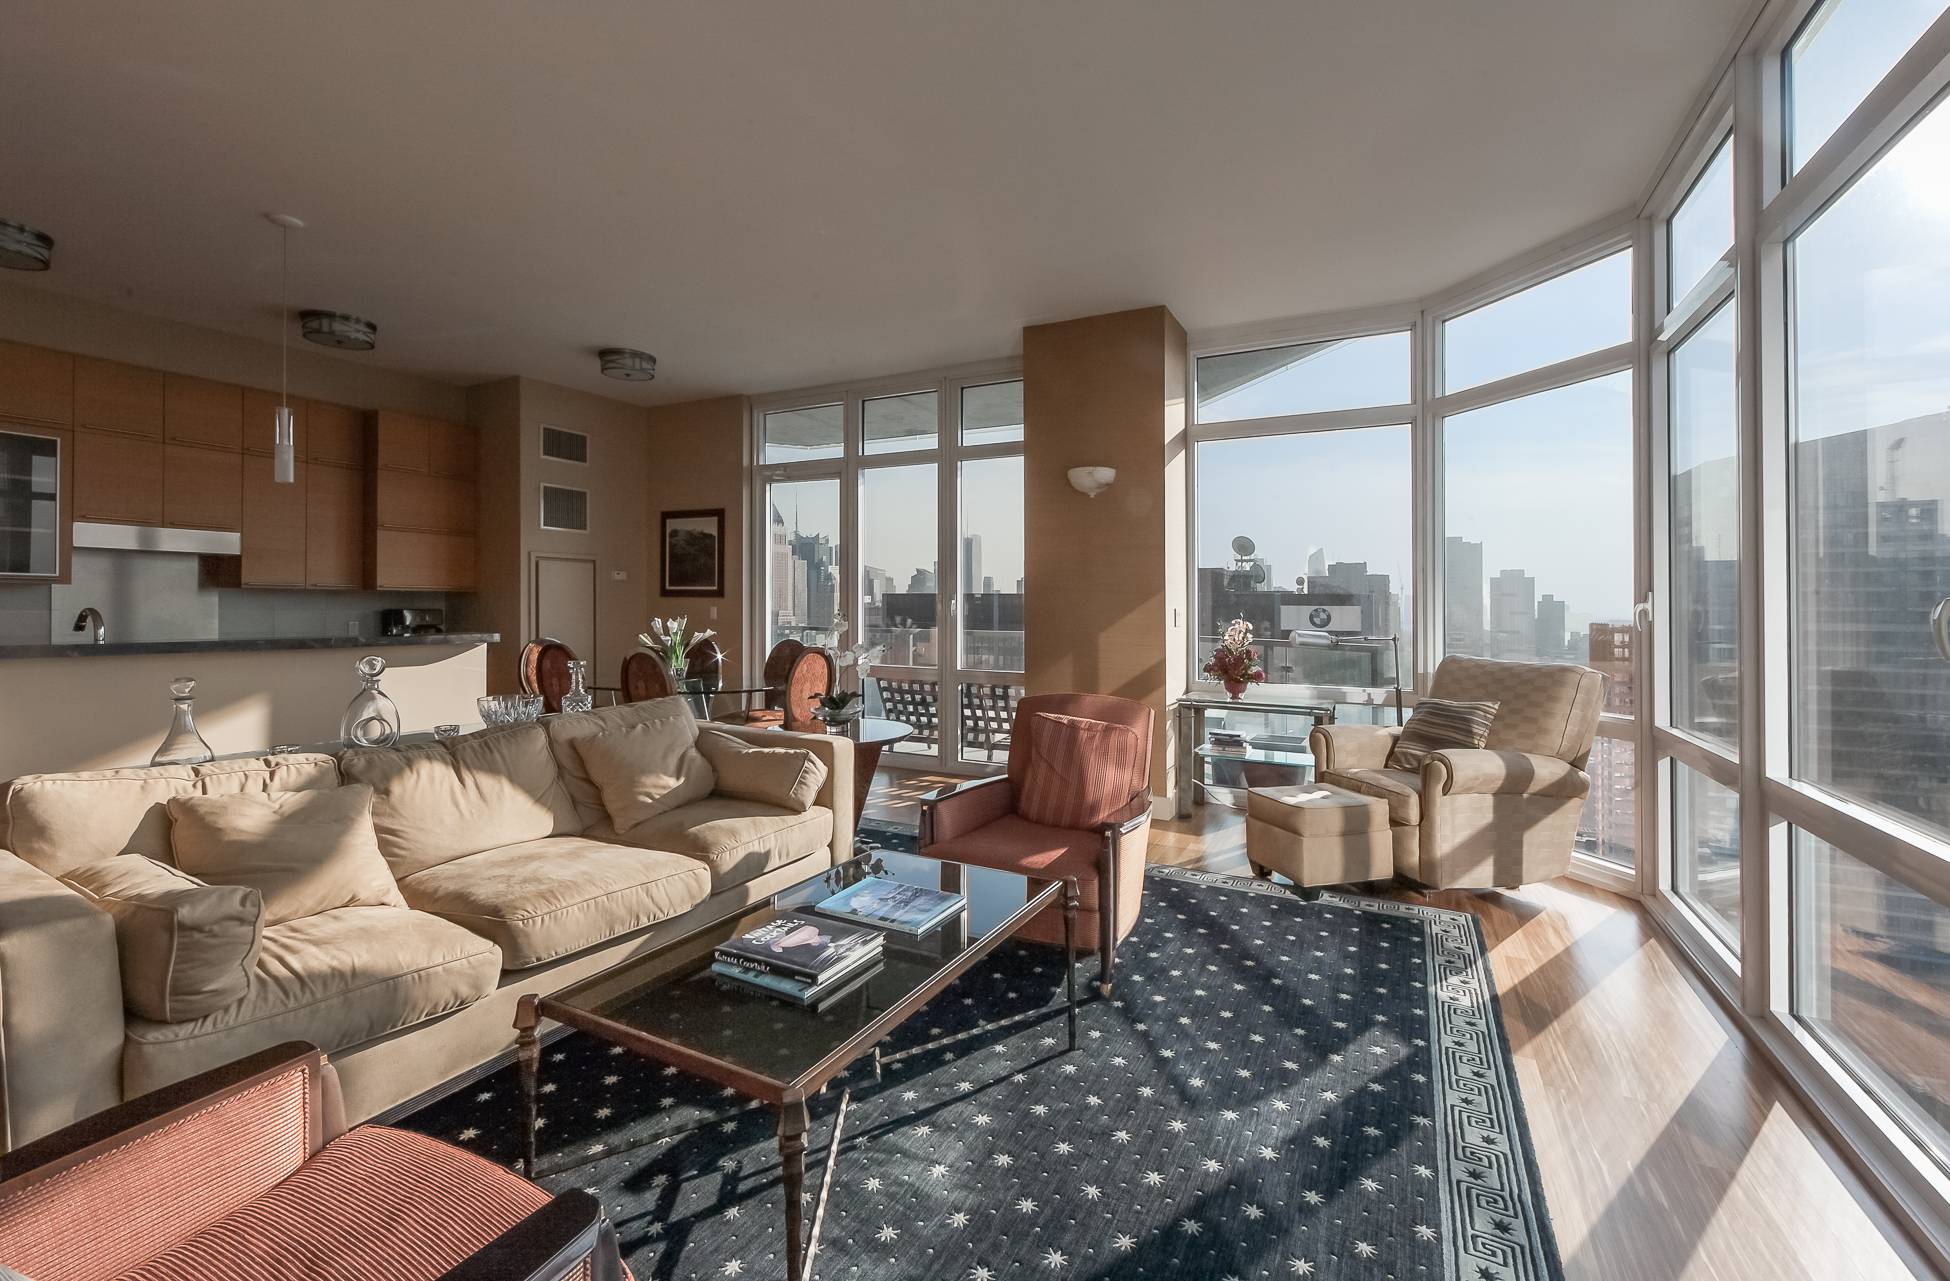 10 West End Avenue, Spectacular, Luxury Condominium Rental, 3 Bedroom, 2.5 bath, with balcony and panoramic views